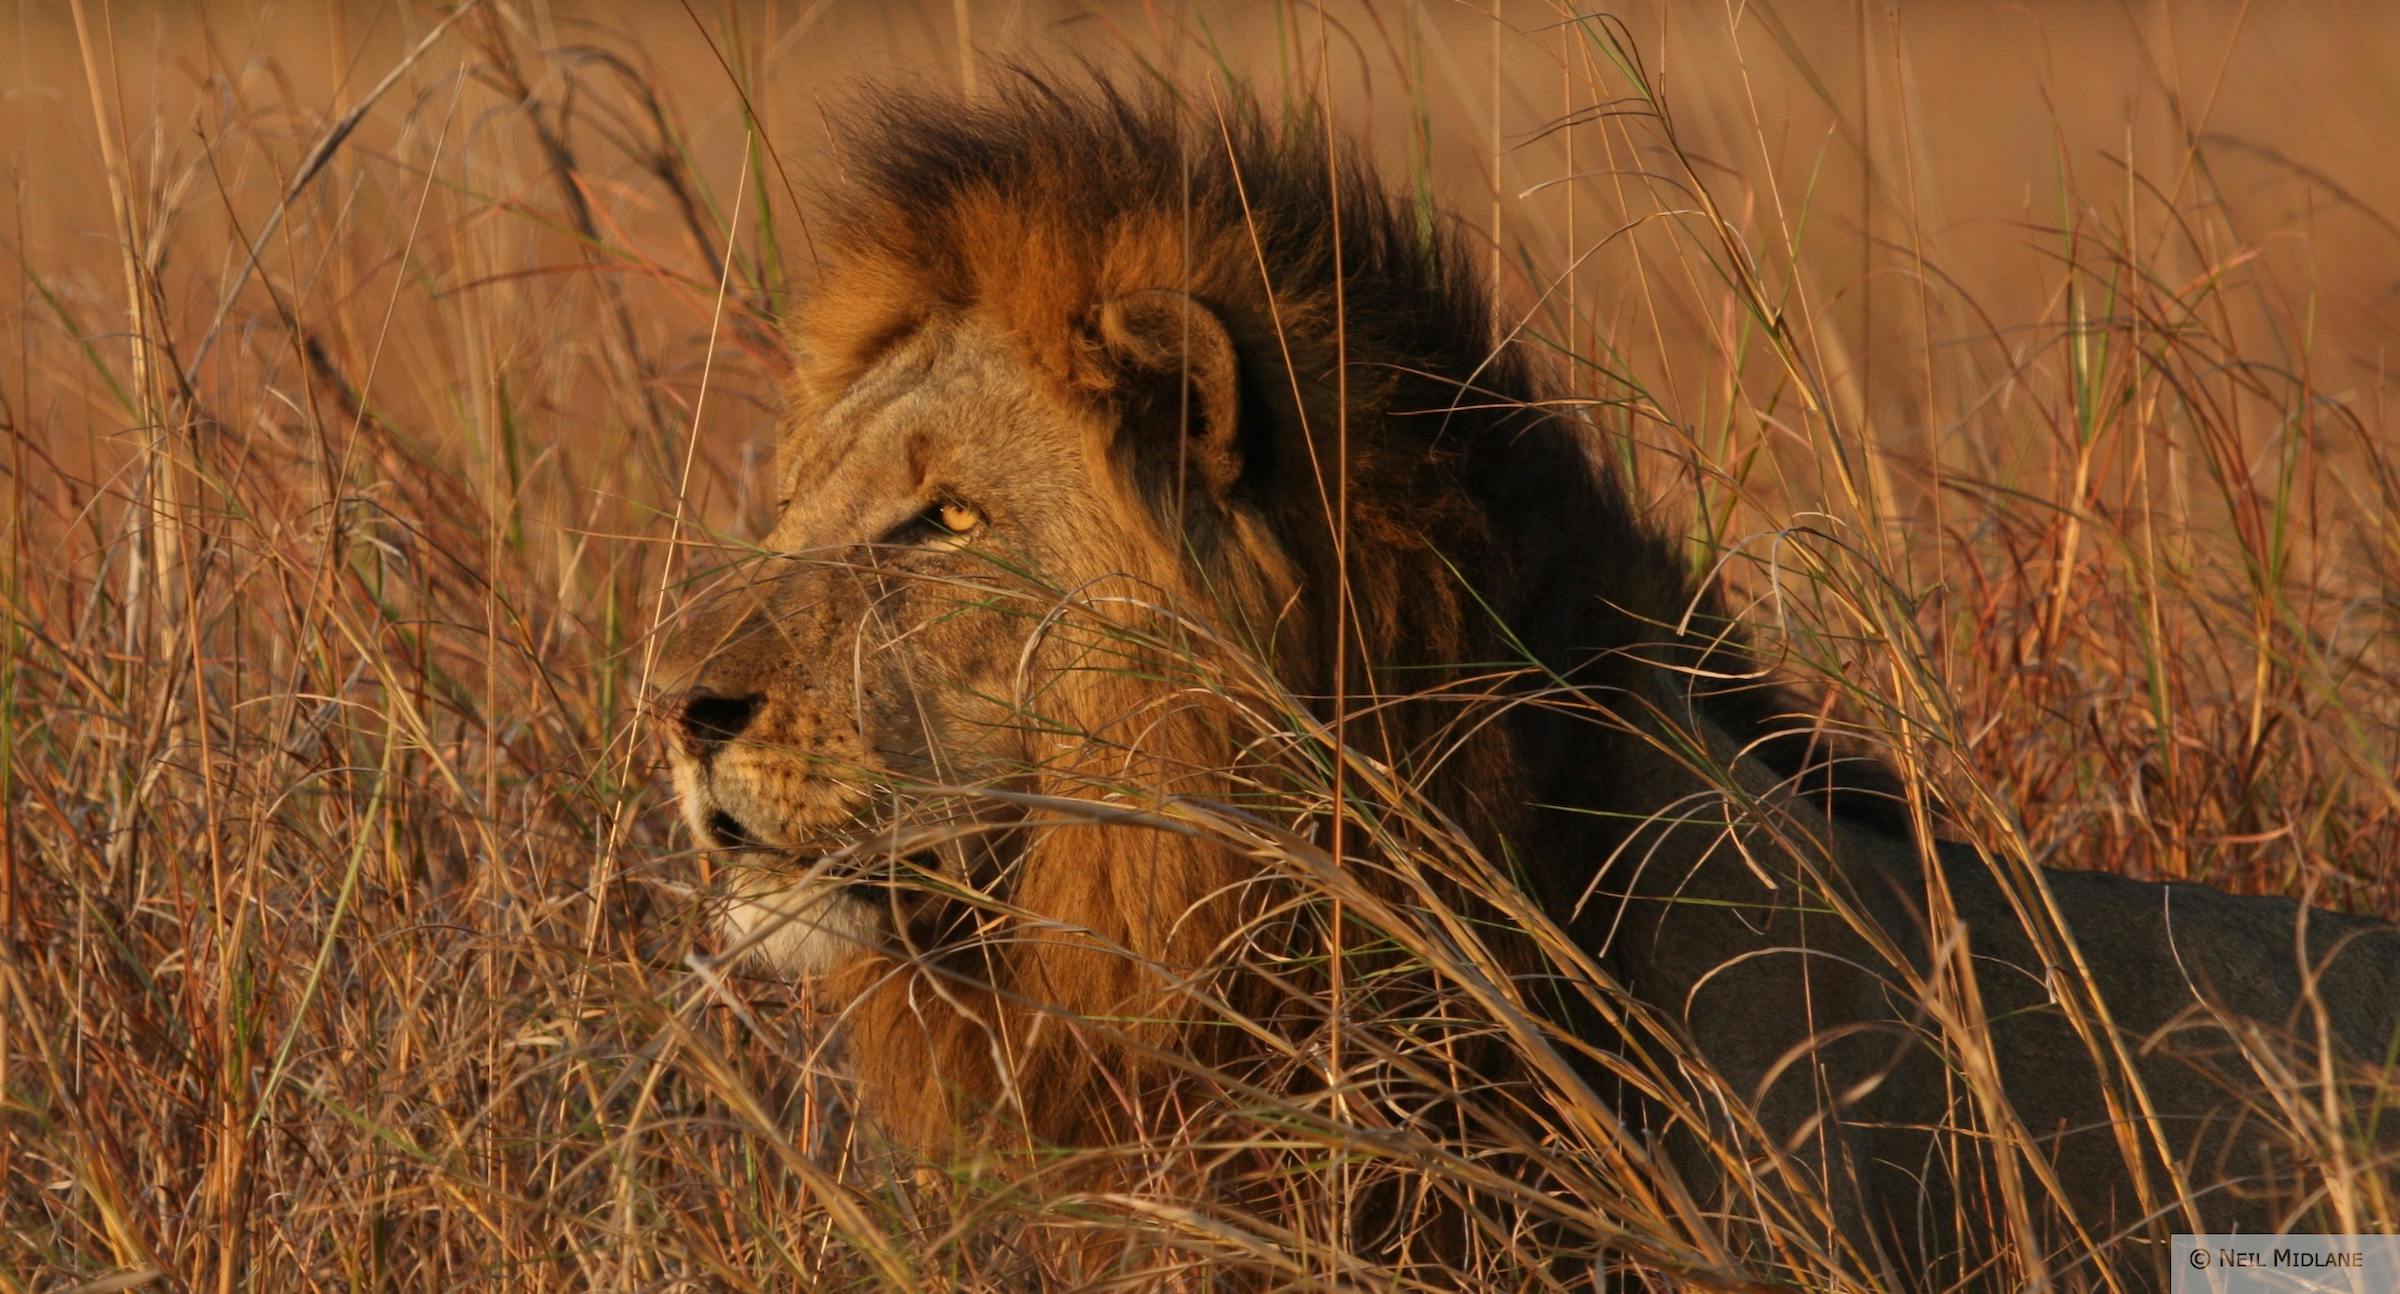 Dr. Peter Lindsey Discusses Lions on Beyond the Lens